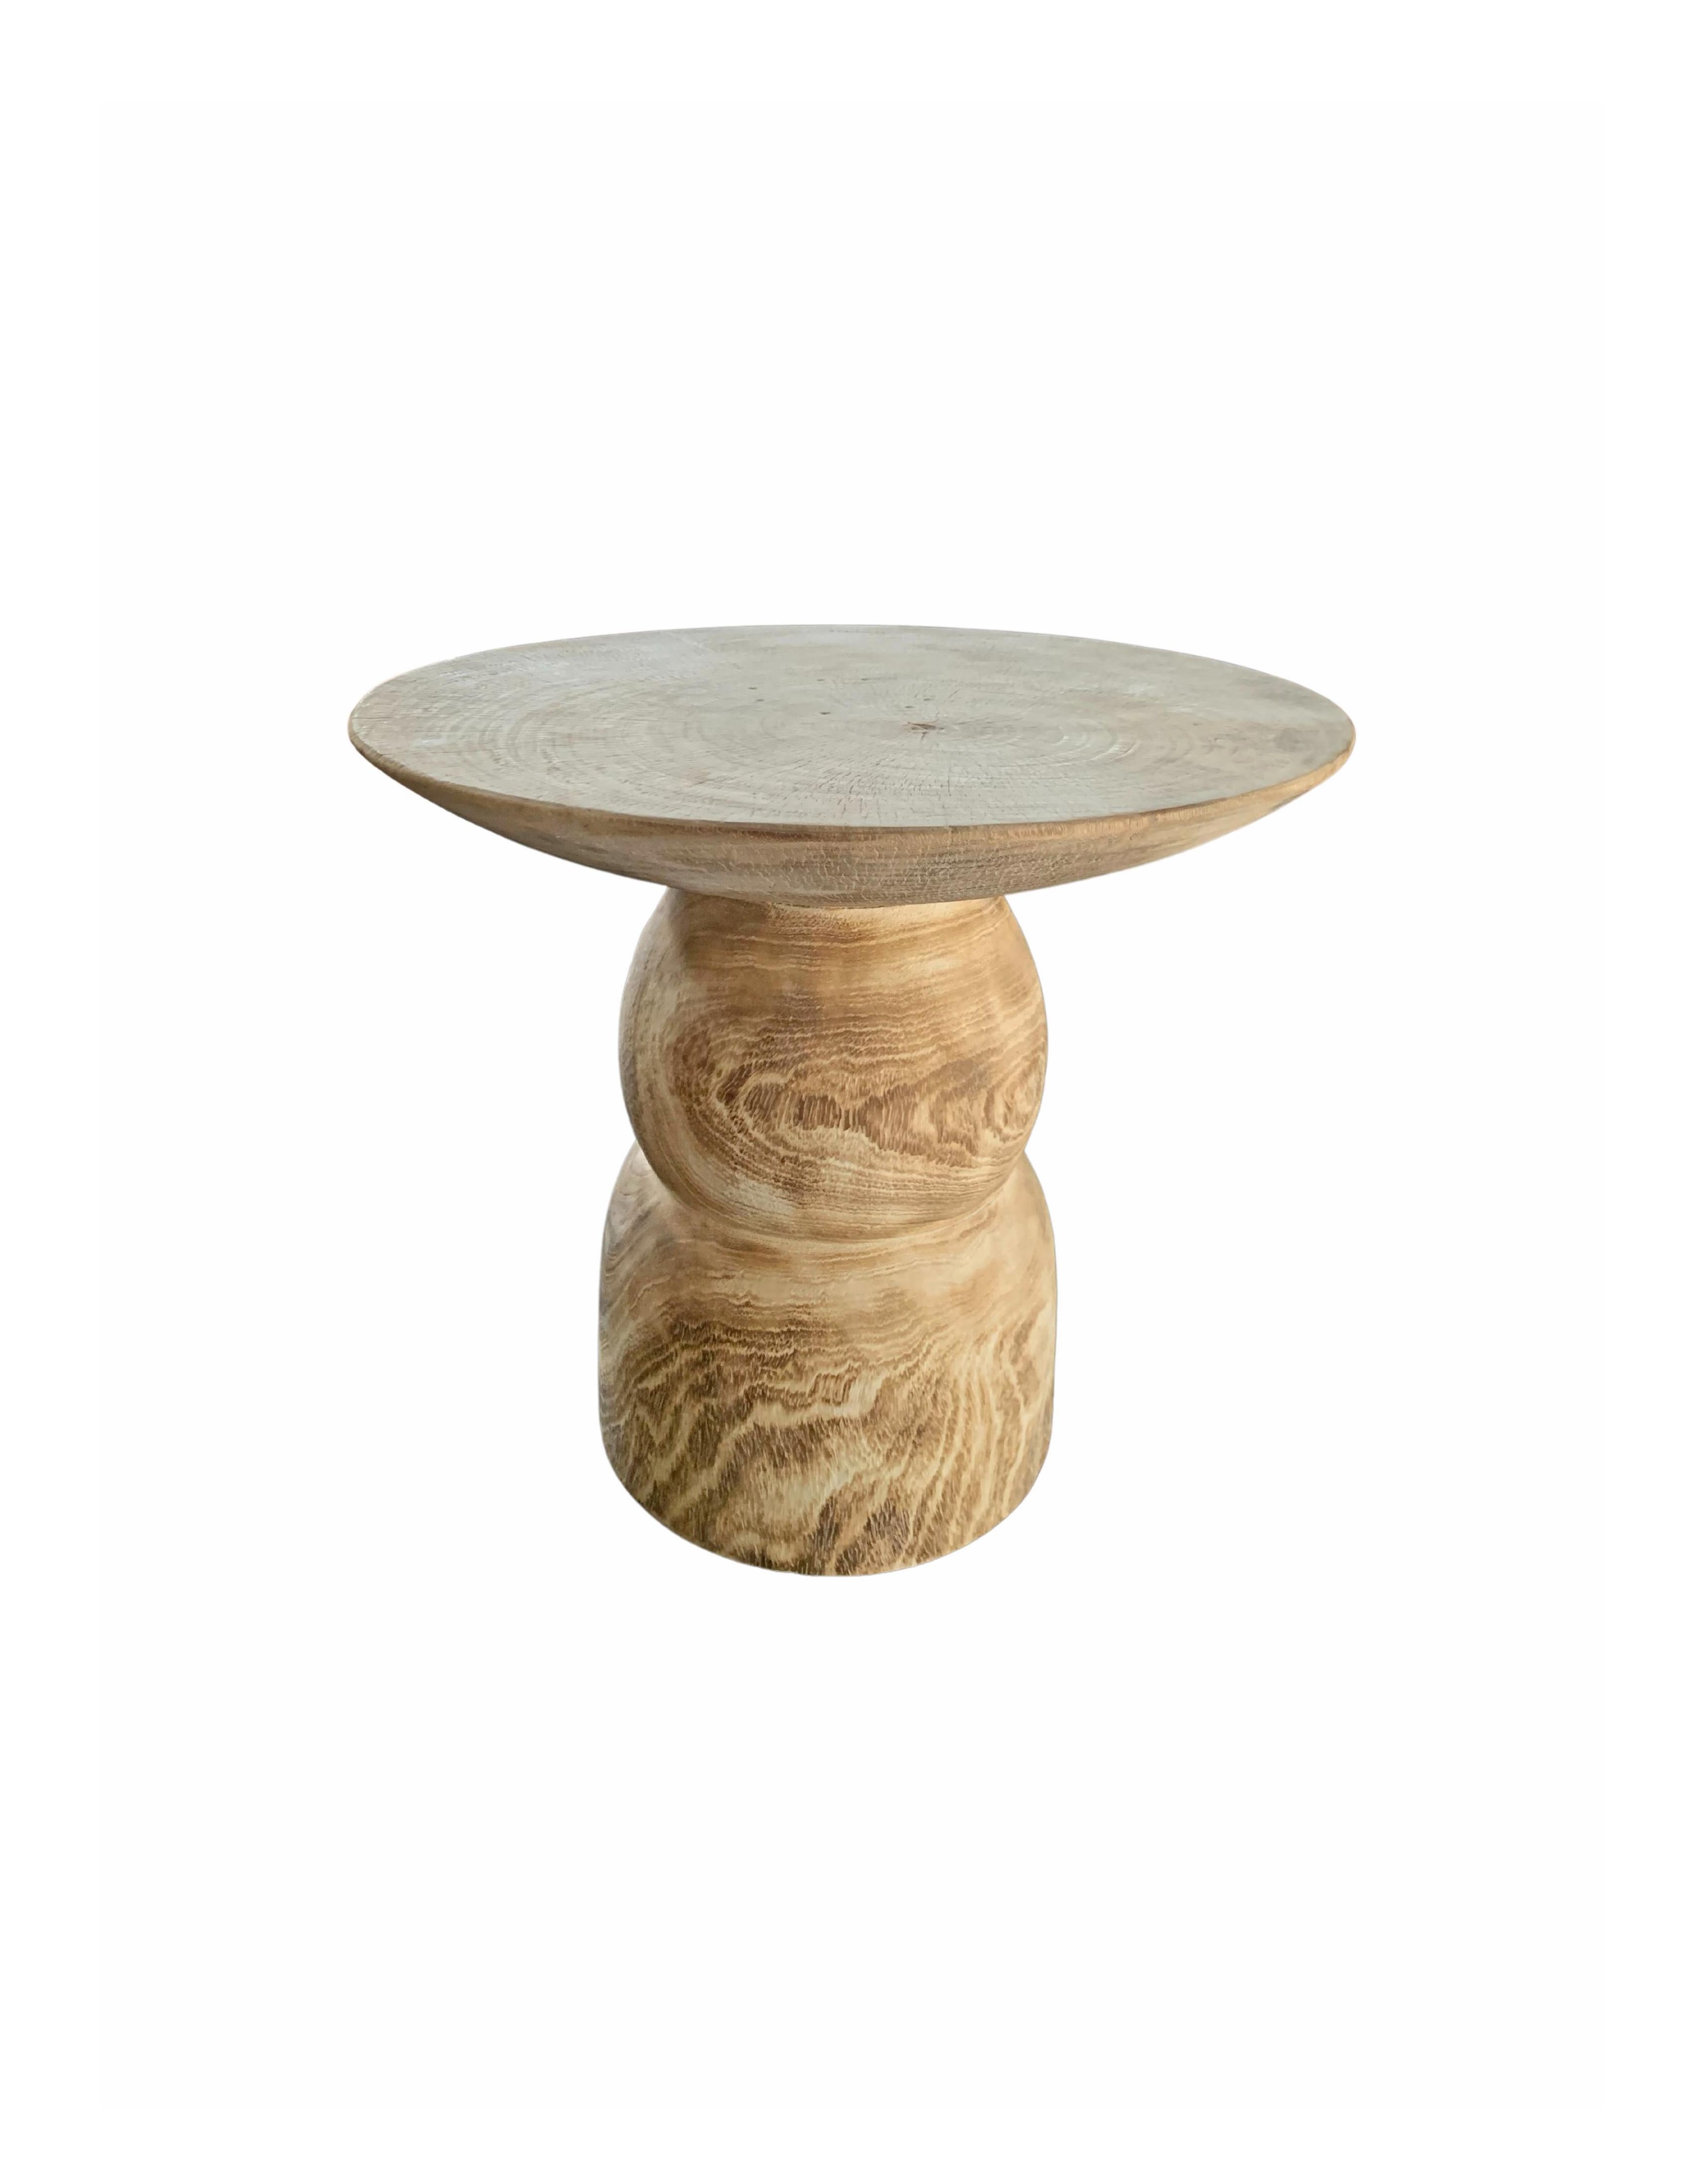 A wonderfully organic round side table. Its pigment was achieved through a bleaching process. Its neutral pigment and subtle wood texture makes it perfect for any space. A uniquely sculptural and versatile piece, this table was crafted from mango